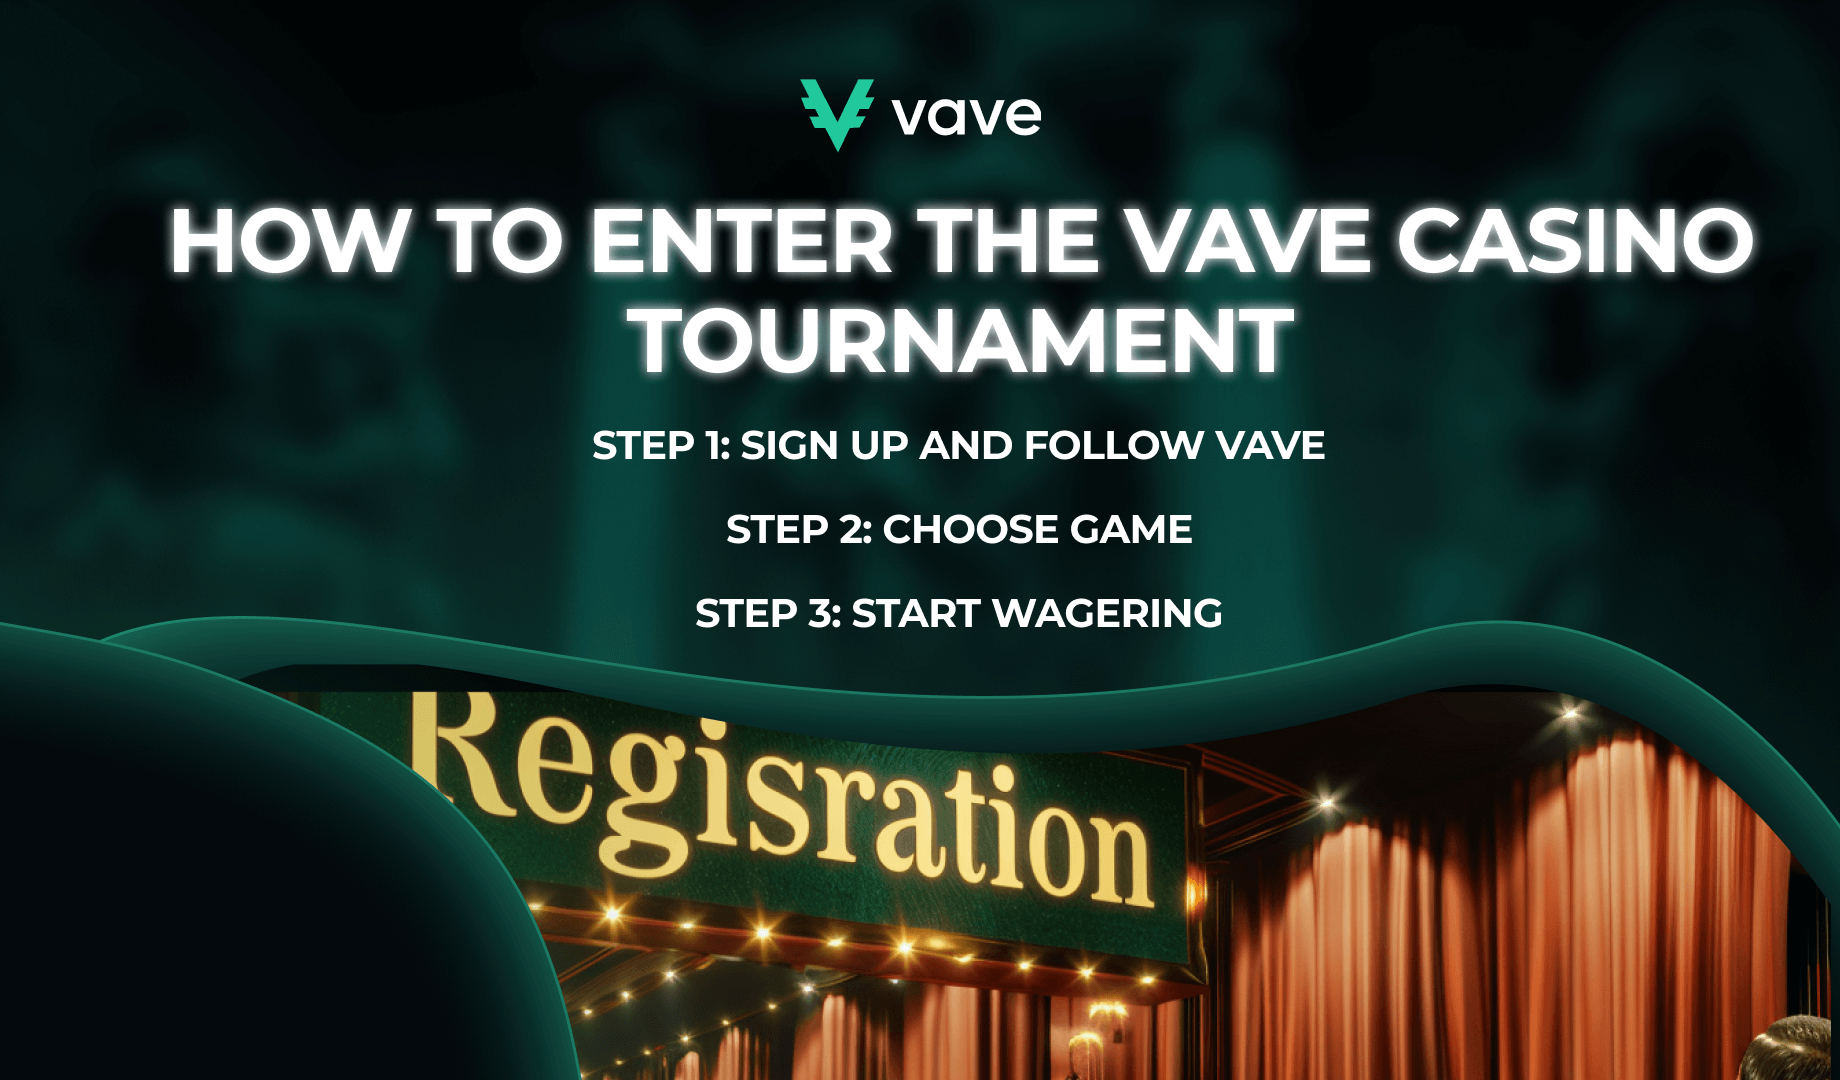 How to enter the tournament